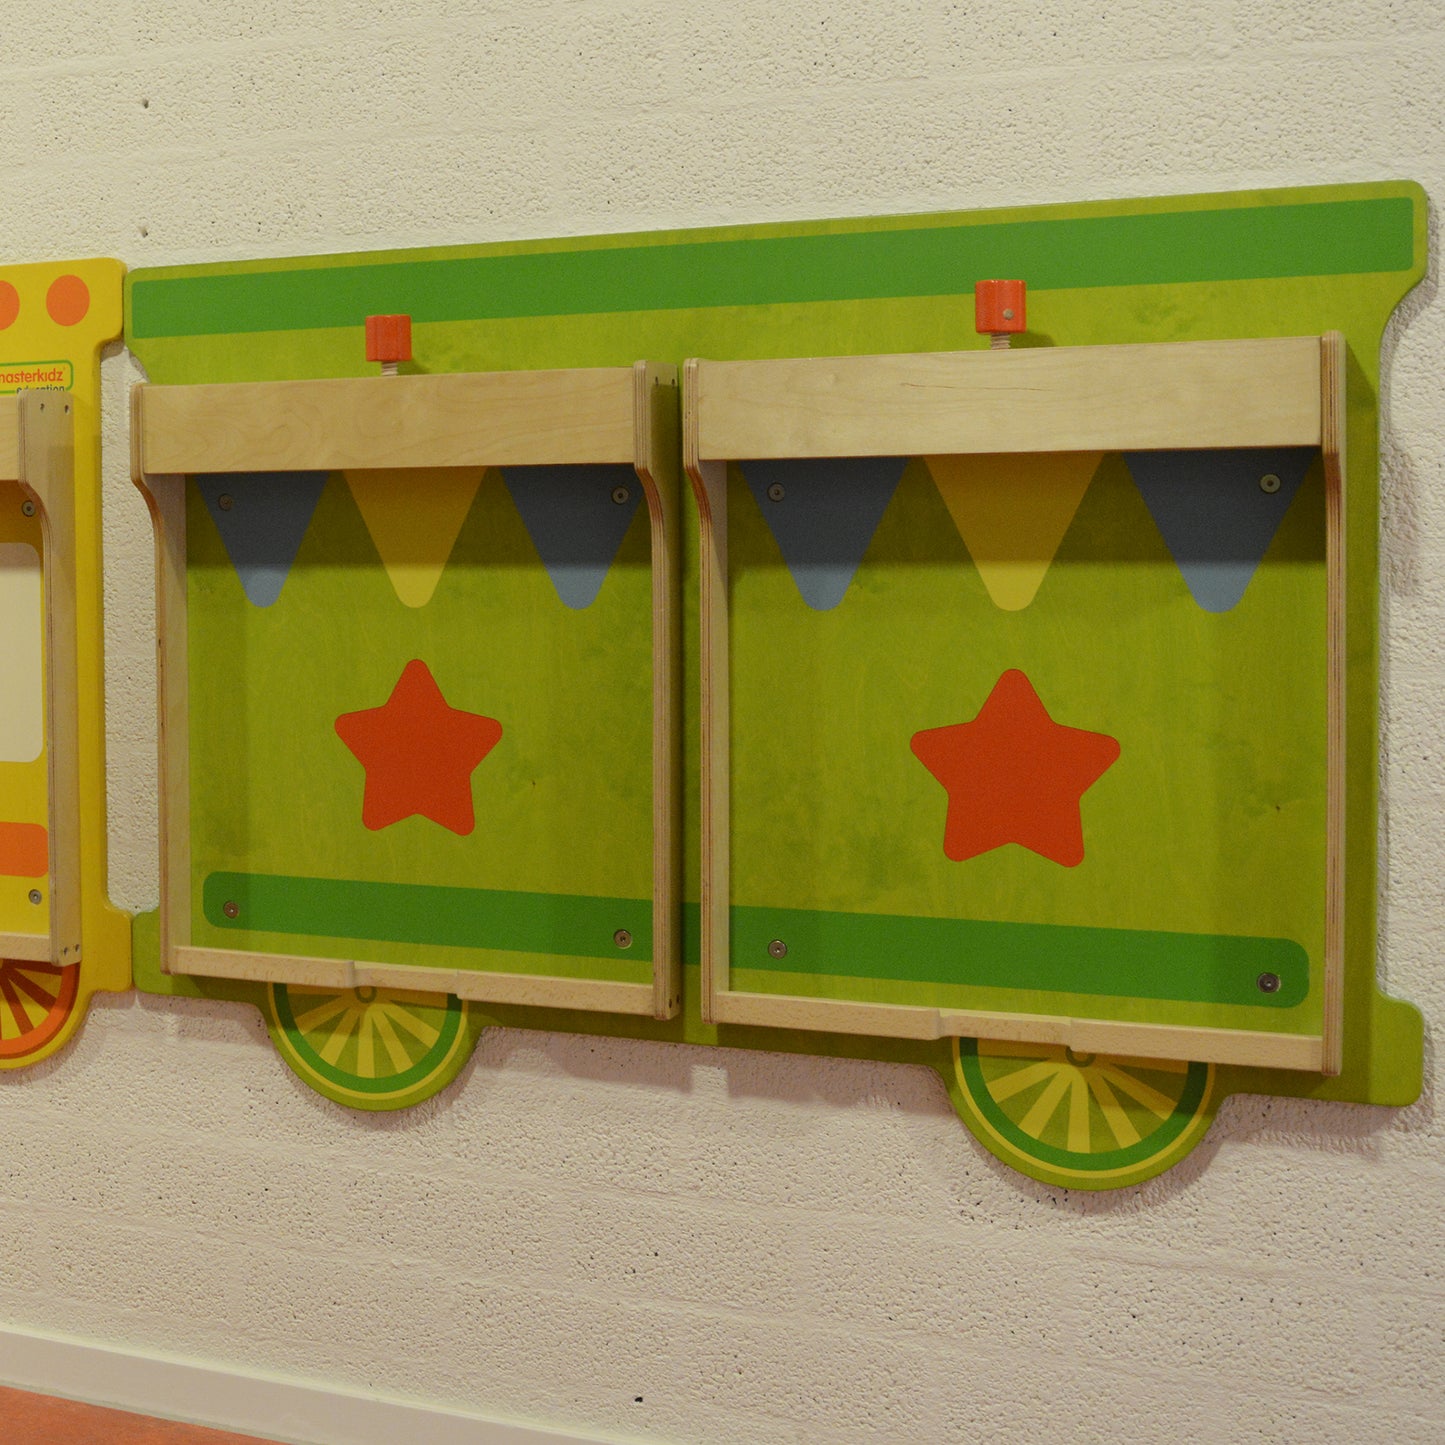 Masterkidz Wall Elements - Flexible Mounting System - Train (without wall element) 自由換板牆面系統 - 火車 (不含牆面遊戲板)